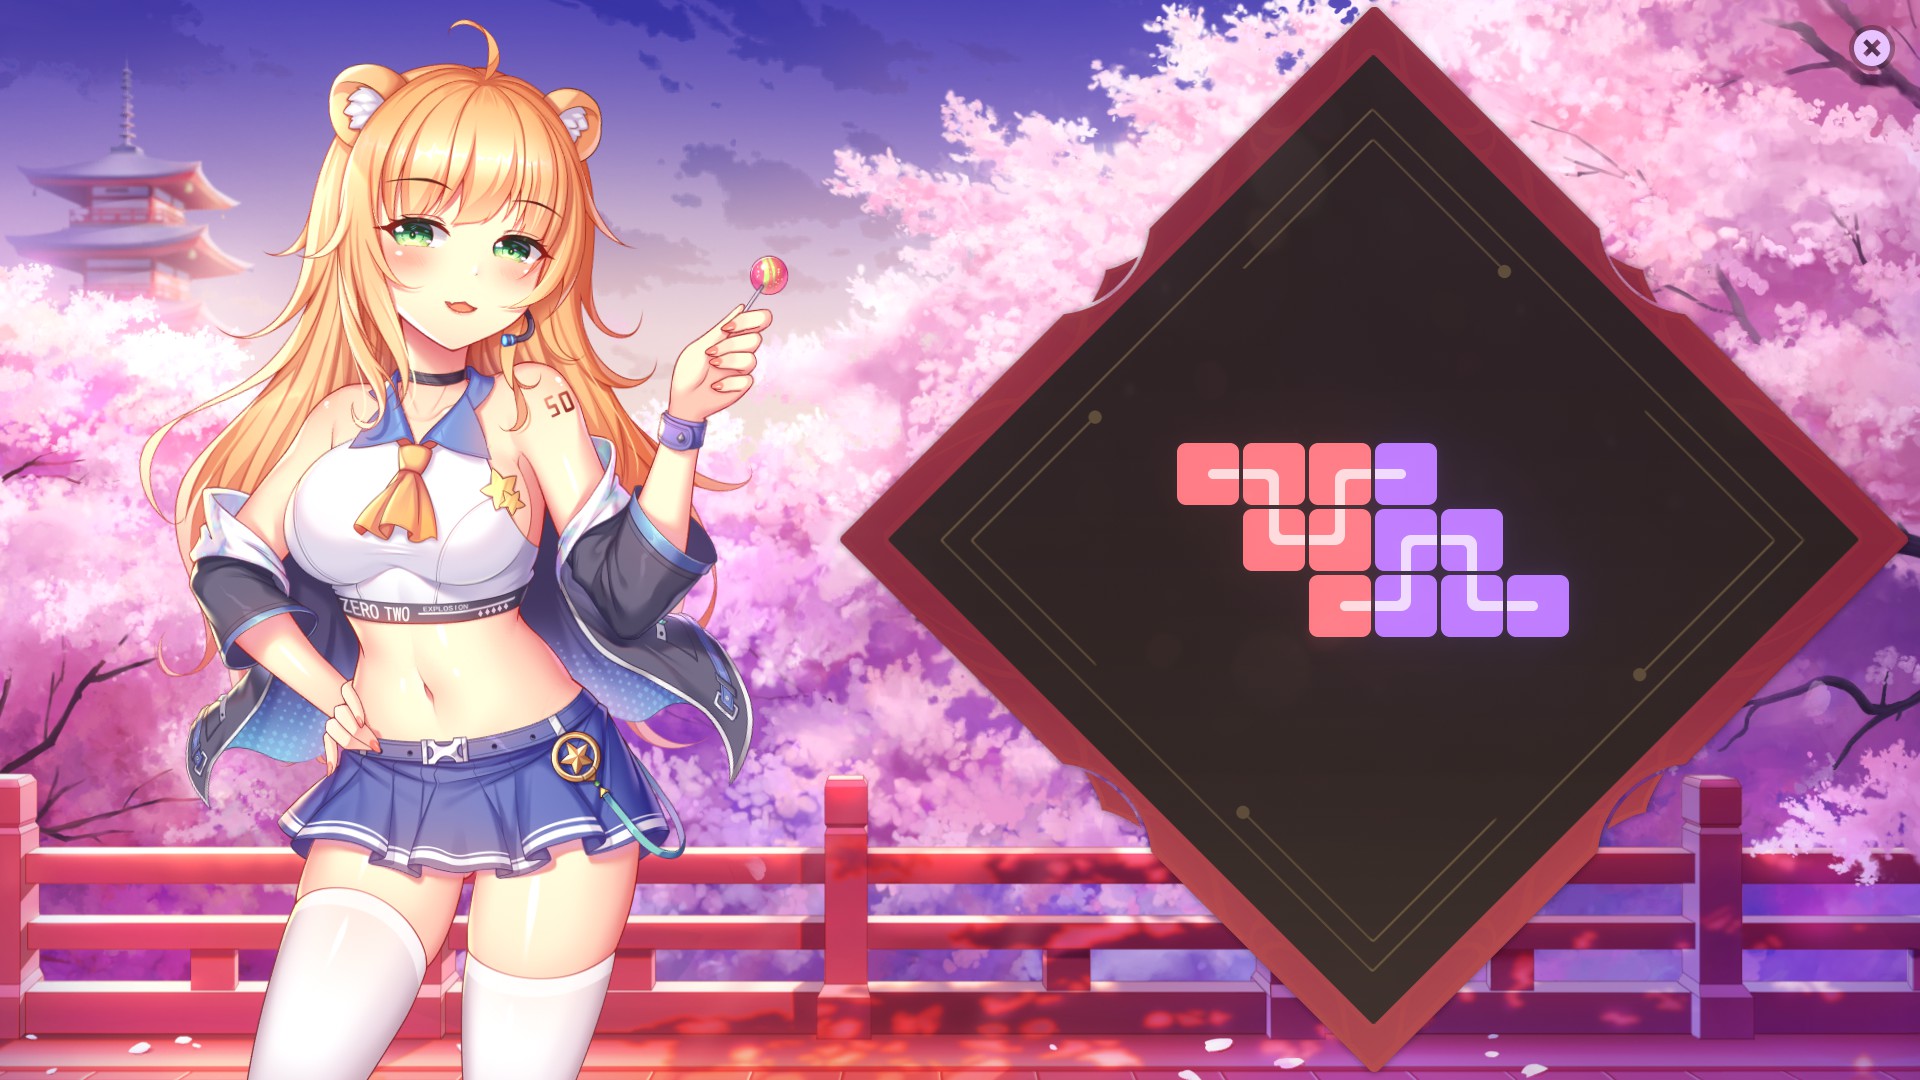 Sakura Hime 2 - Complete Achievement Guide +Walkthrough - Images of completed levels - 42A37E7